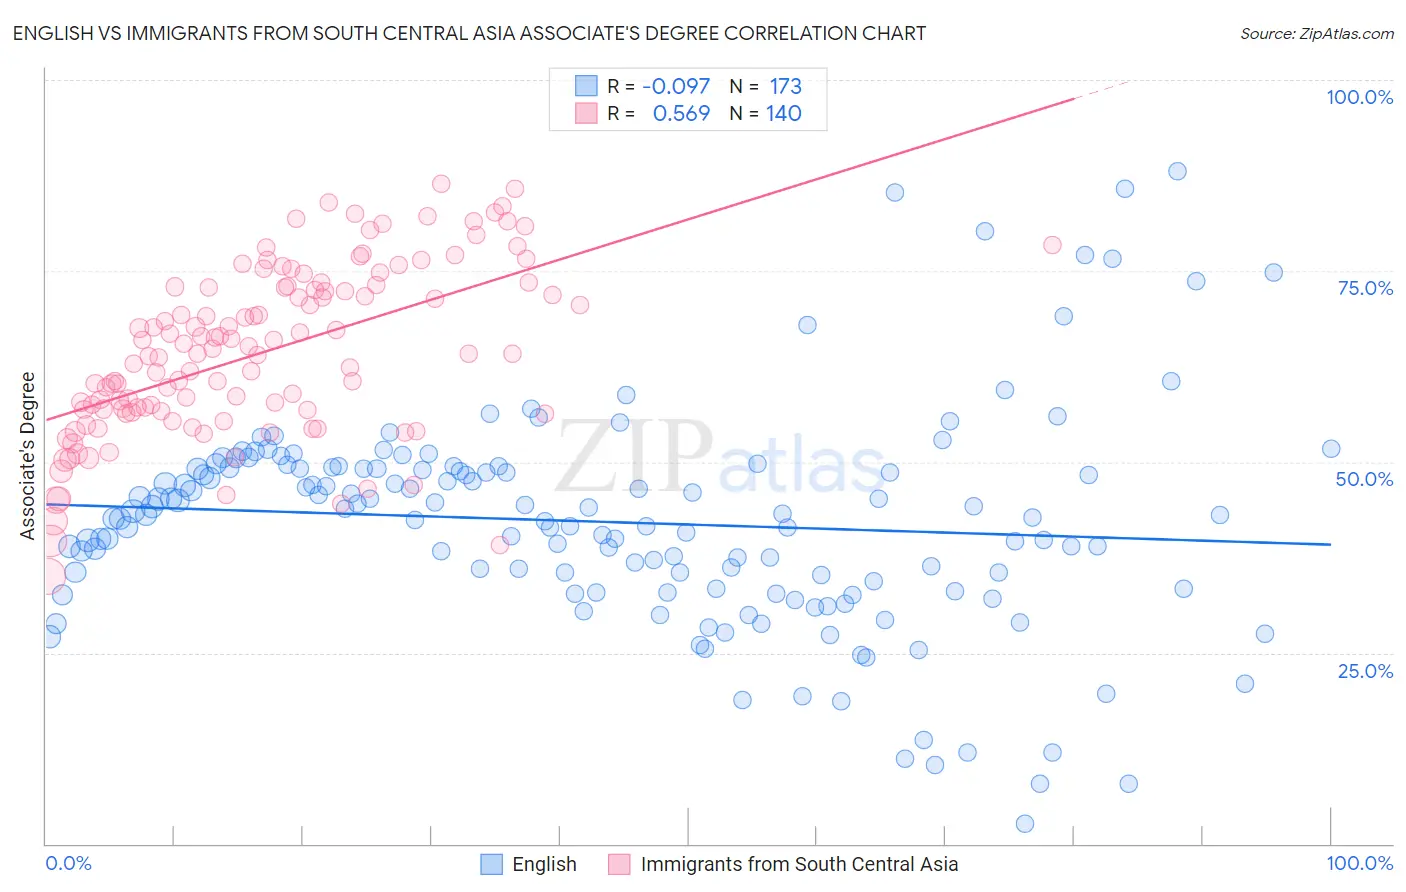 English vs Immigrants from South Central Asia Associate's Degree